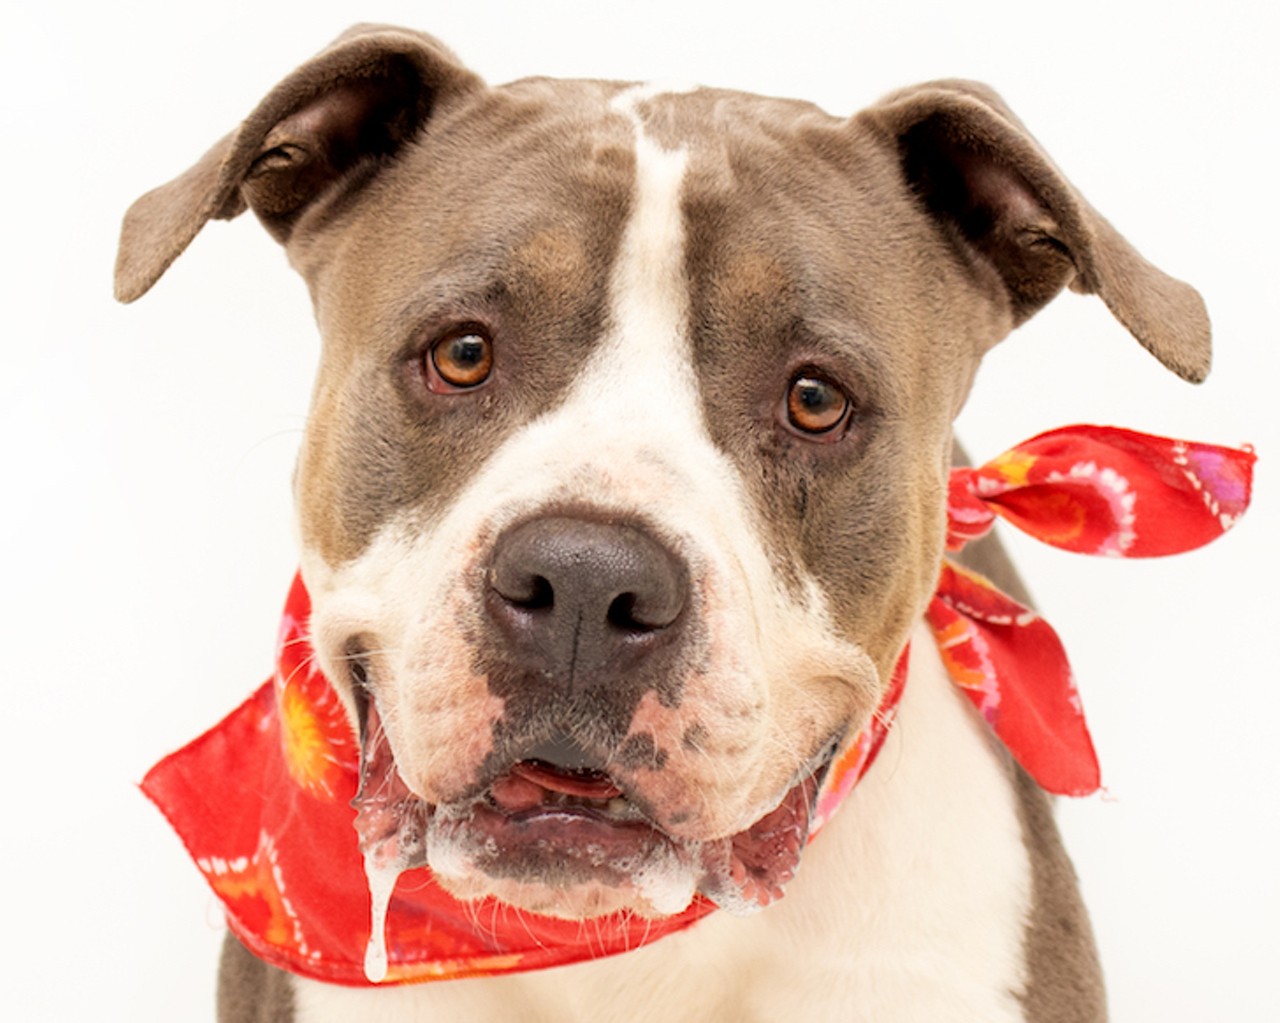 Spend your weekend with these adorable, adoptable Orange County dogs